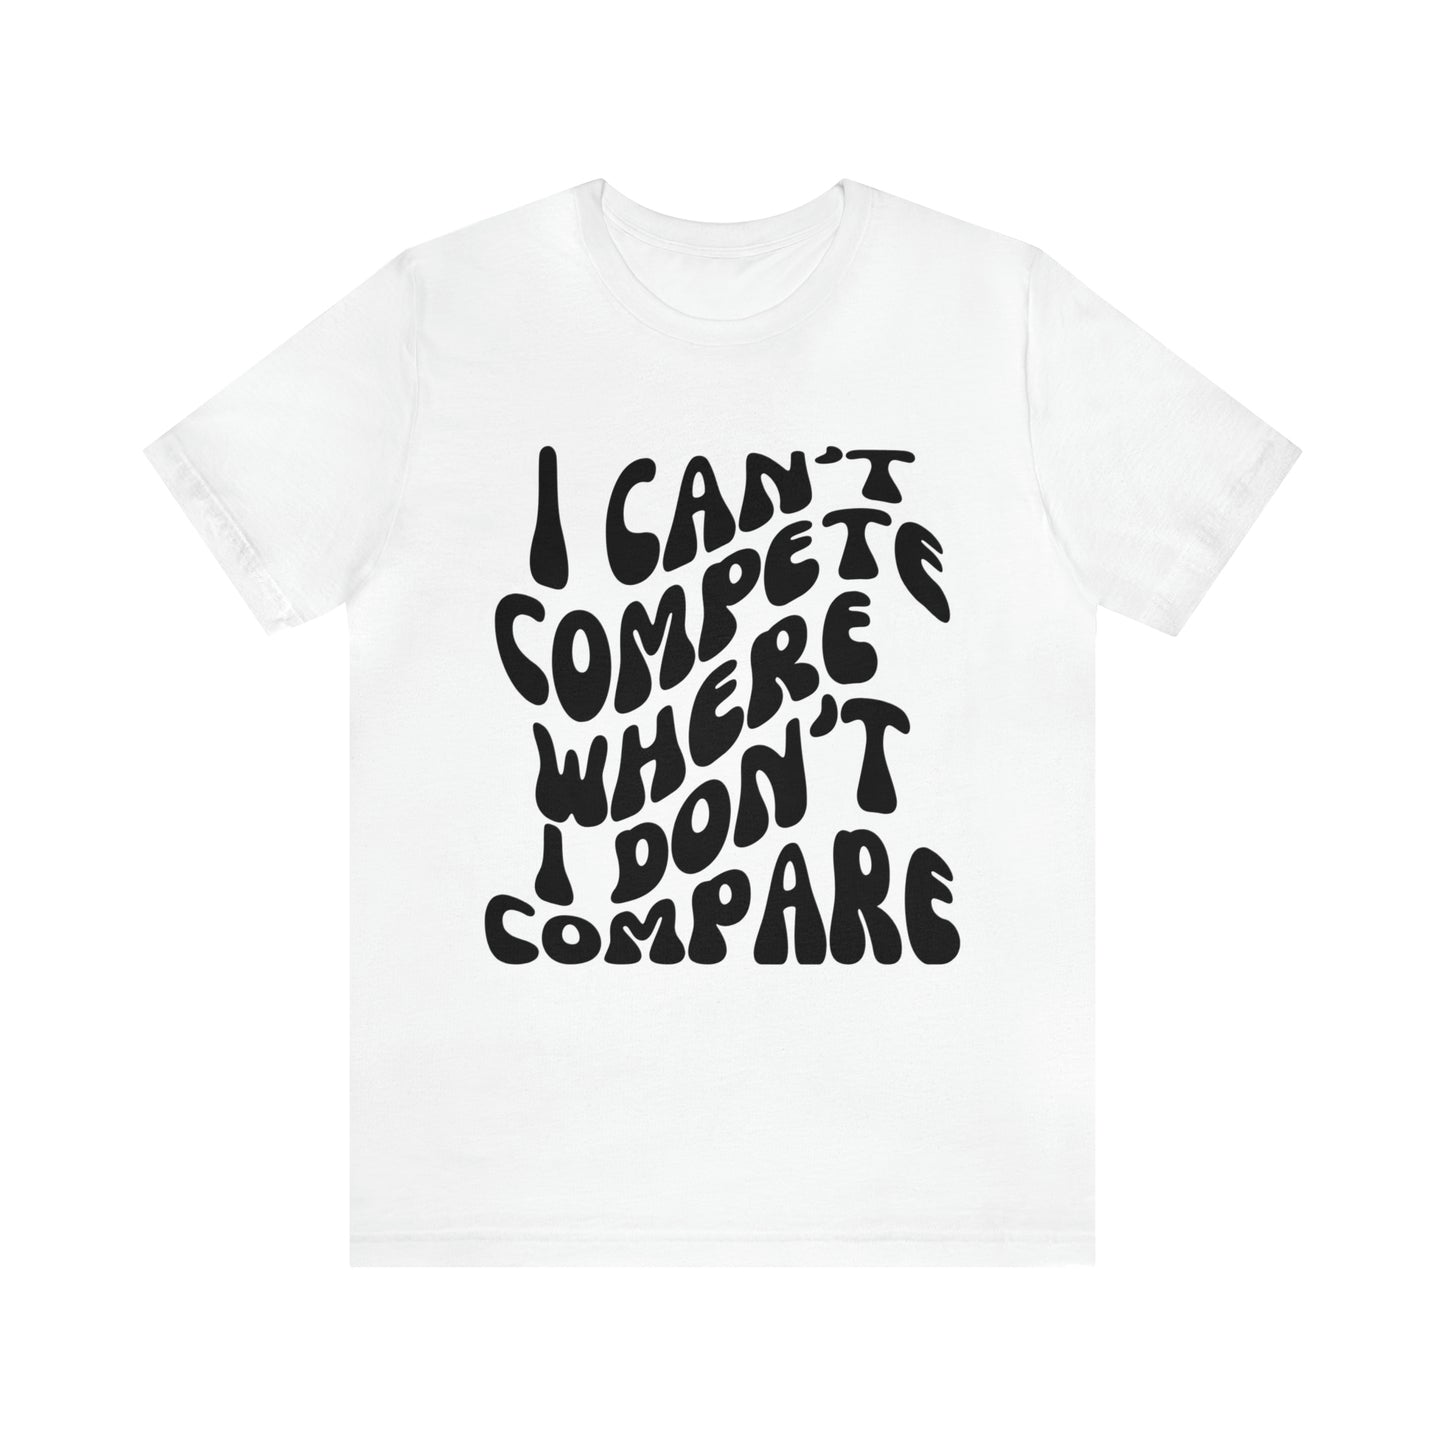 Can't Compete, Can't Compare Unisex Tee